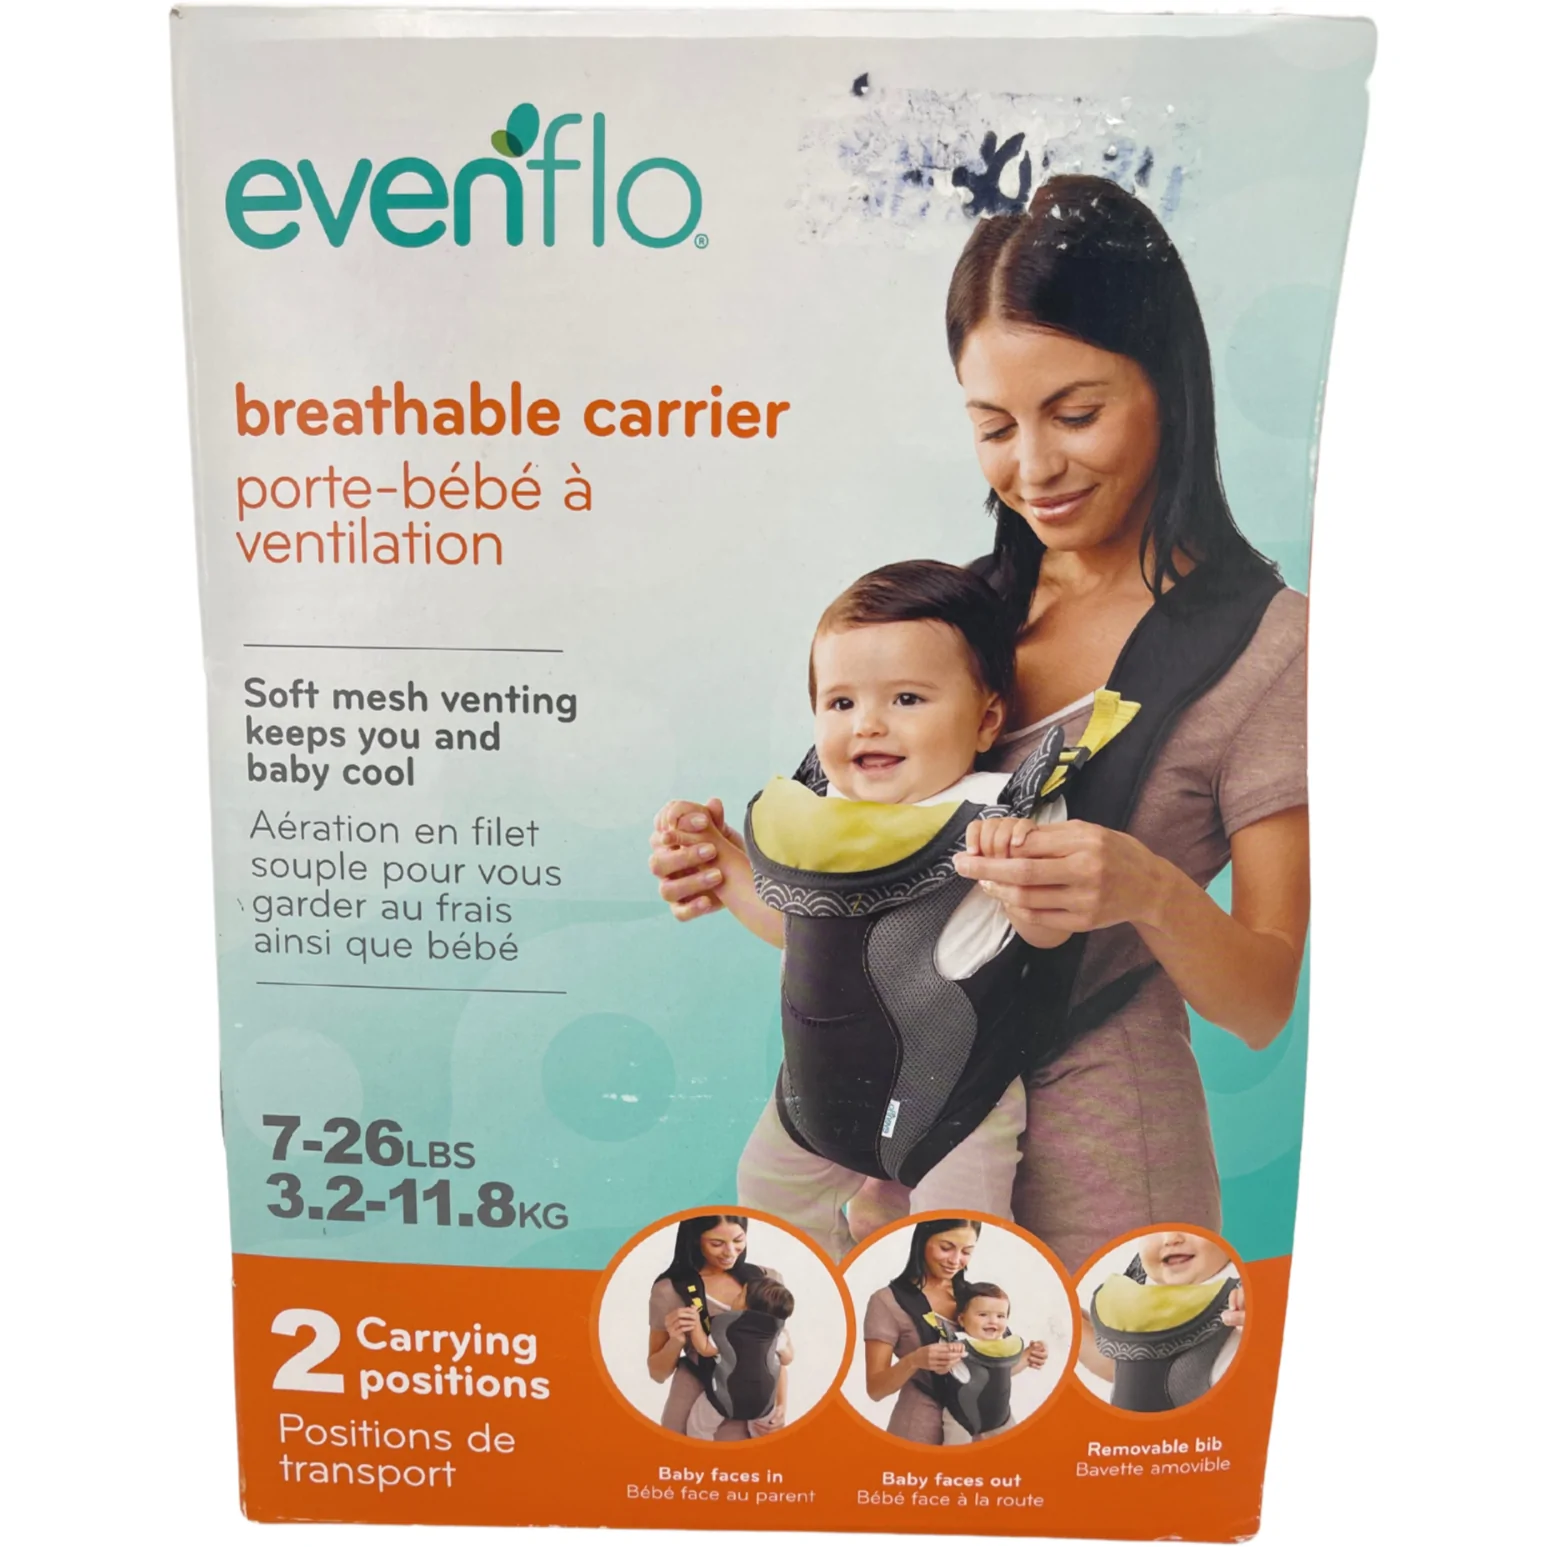 Evenflo Breathable Baby Carrier / 7-26lbs / Grey, Black & Yellow